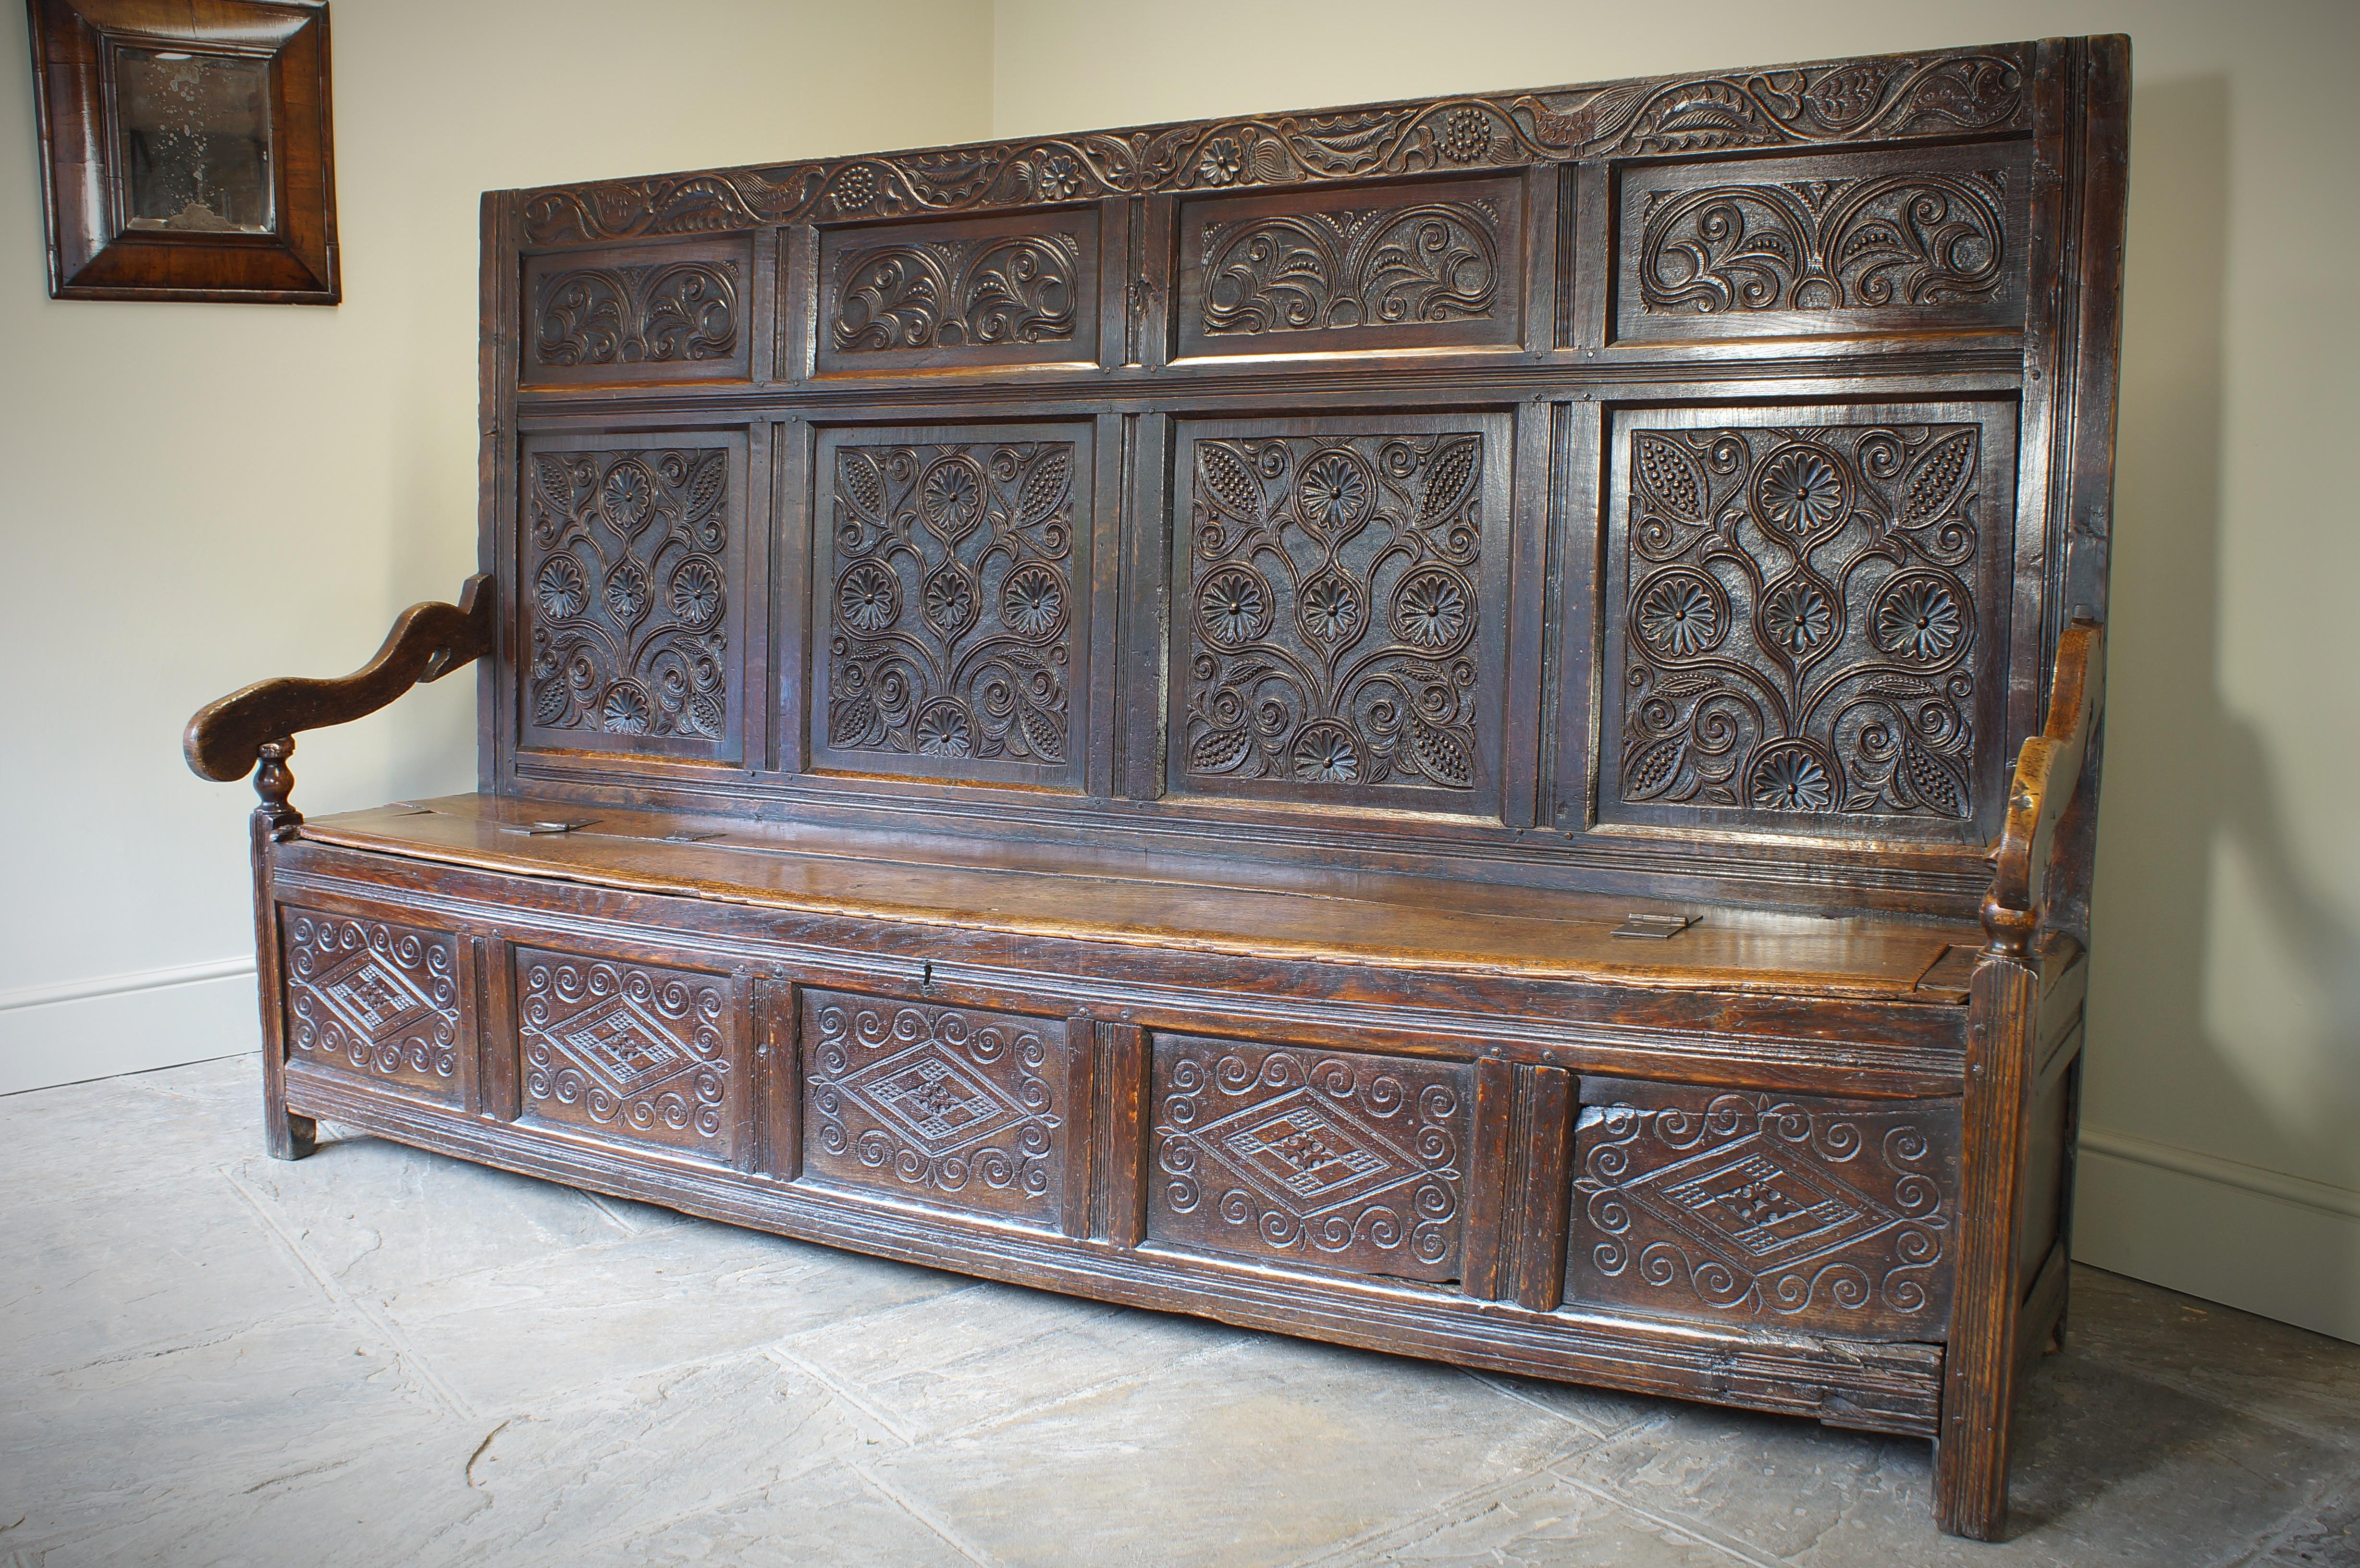 Hand-Carved An Exceptional 17th Century English Oak Carved Box Settle.